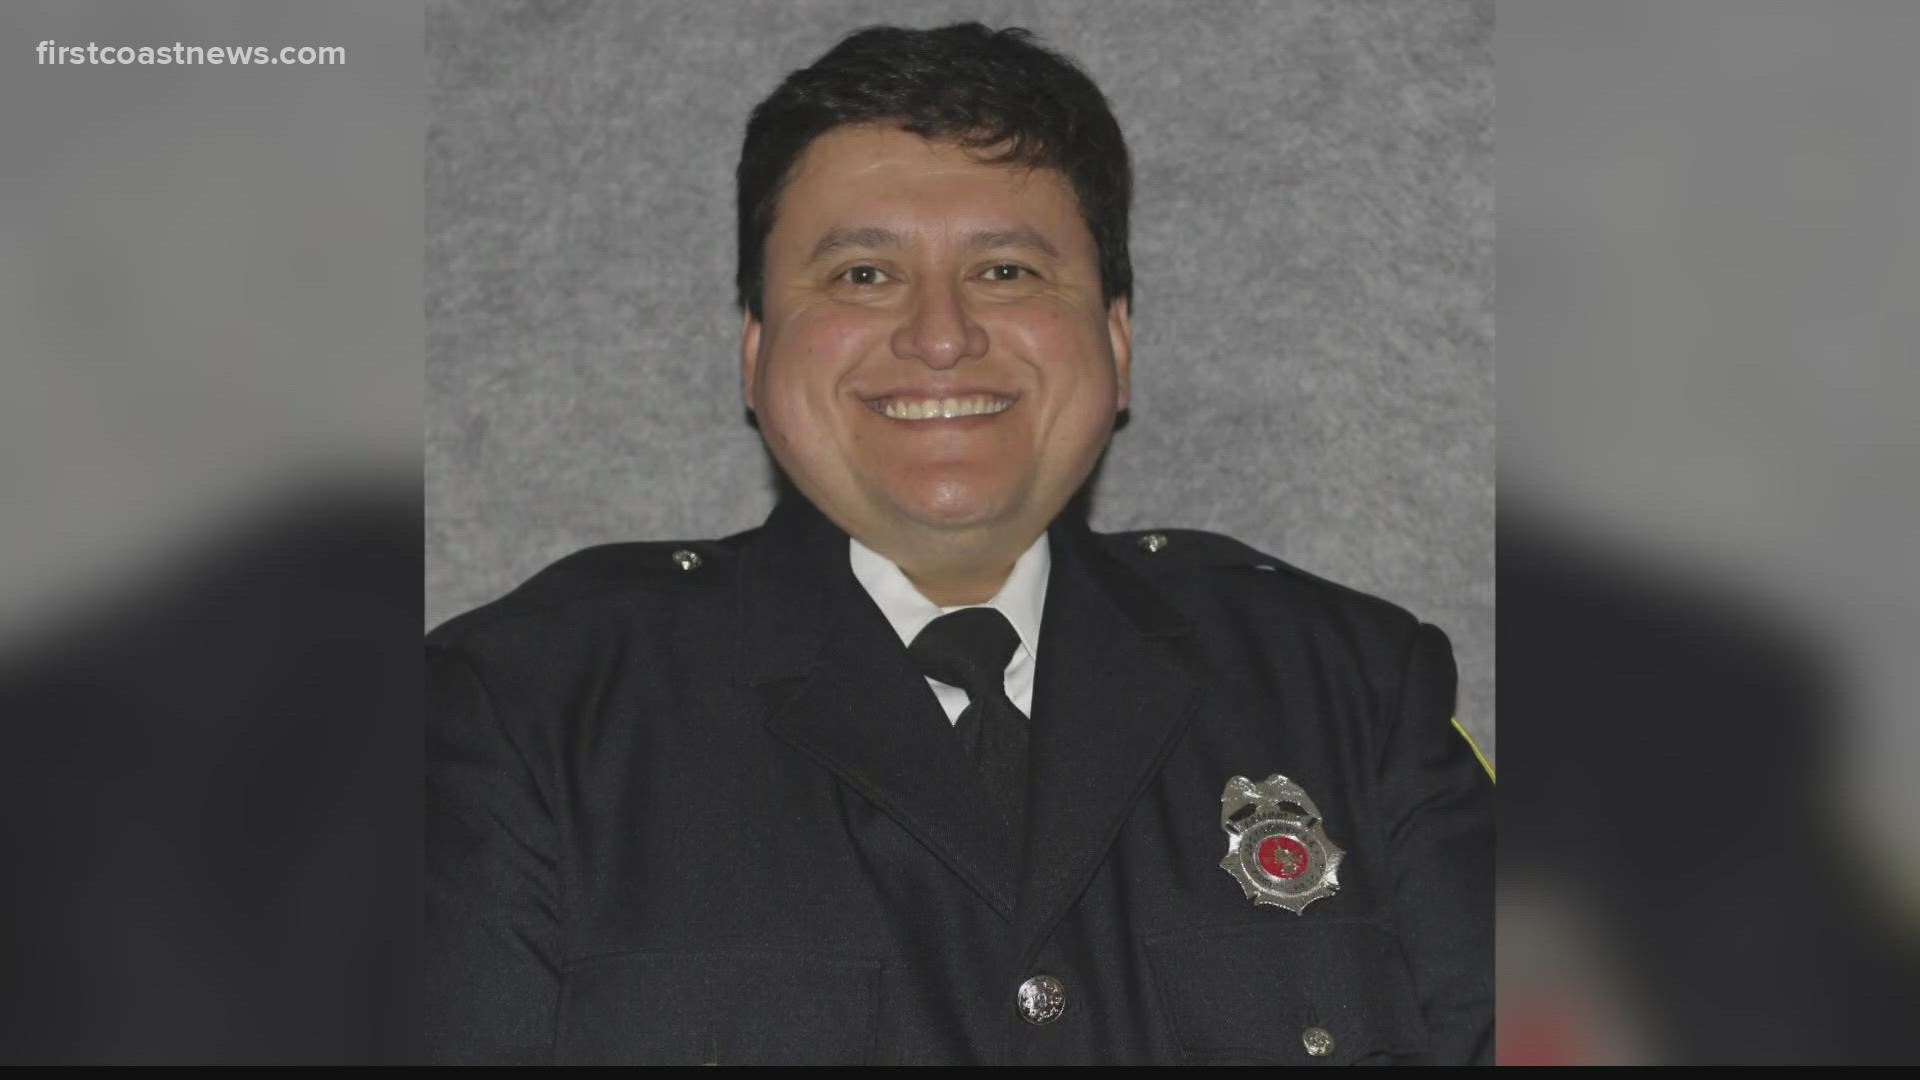 Lieutenant Mario J. Moya of Rescue-42-B served JFRD for 17 years. The agency says he is survived by his wife Christina and children Bobby, Bella, and MJ.